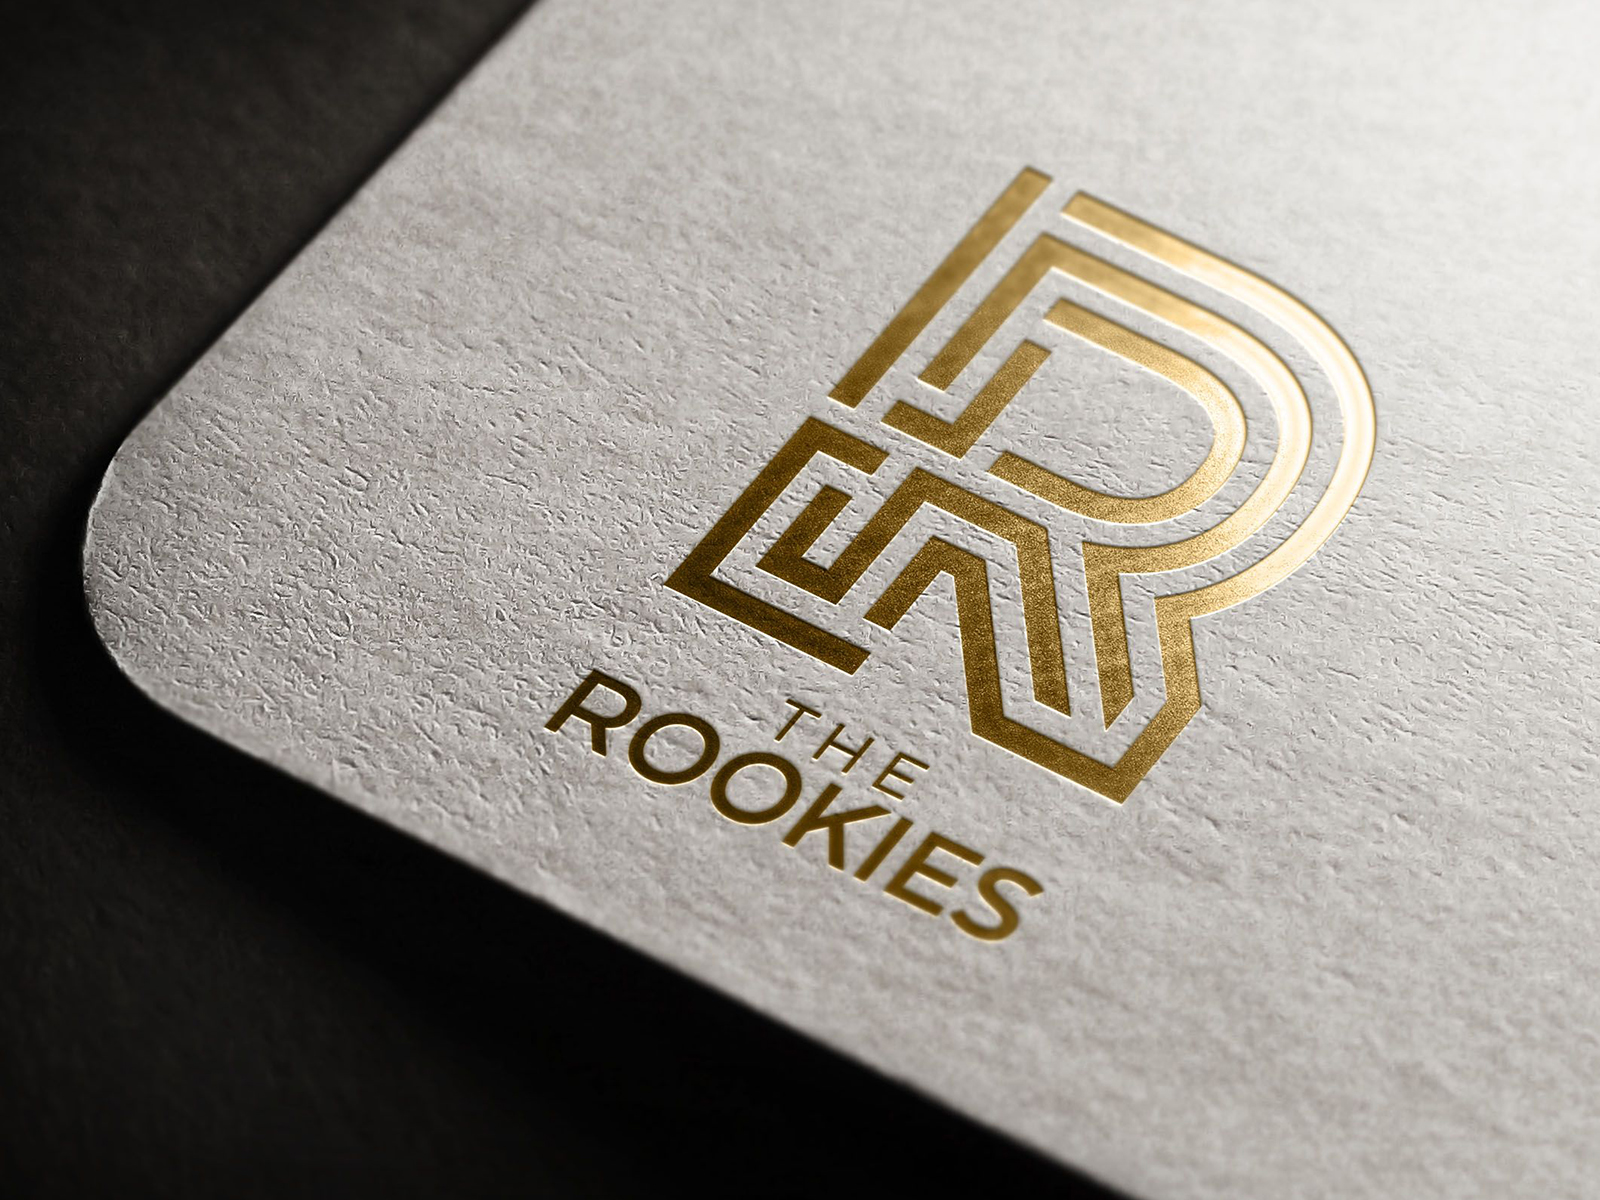 Golden "R" logo for the Rookies imposed near corner of grey paper